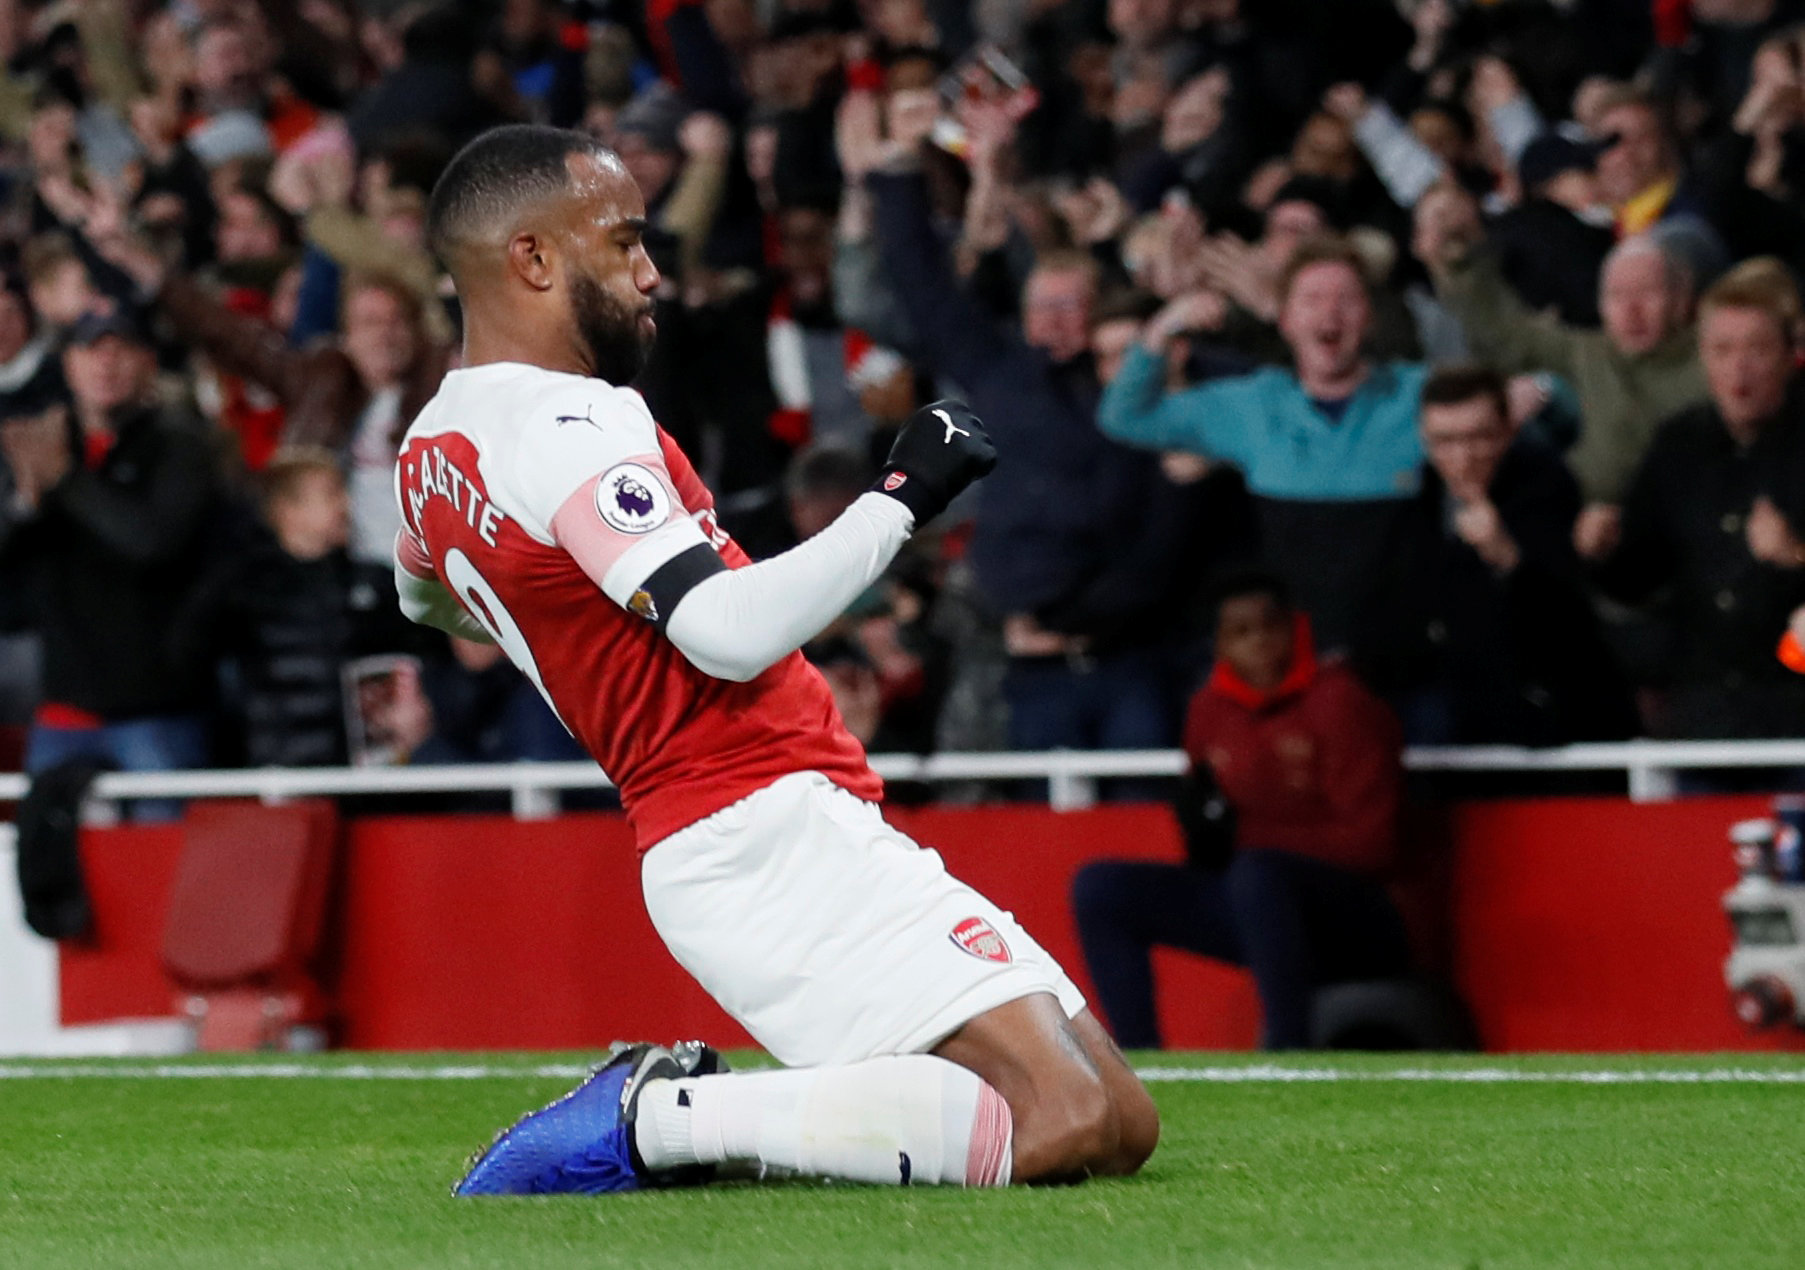 Football: Lacazette strikes late as Arsenal hold Liverpool